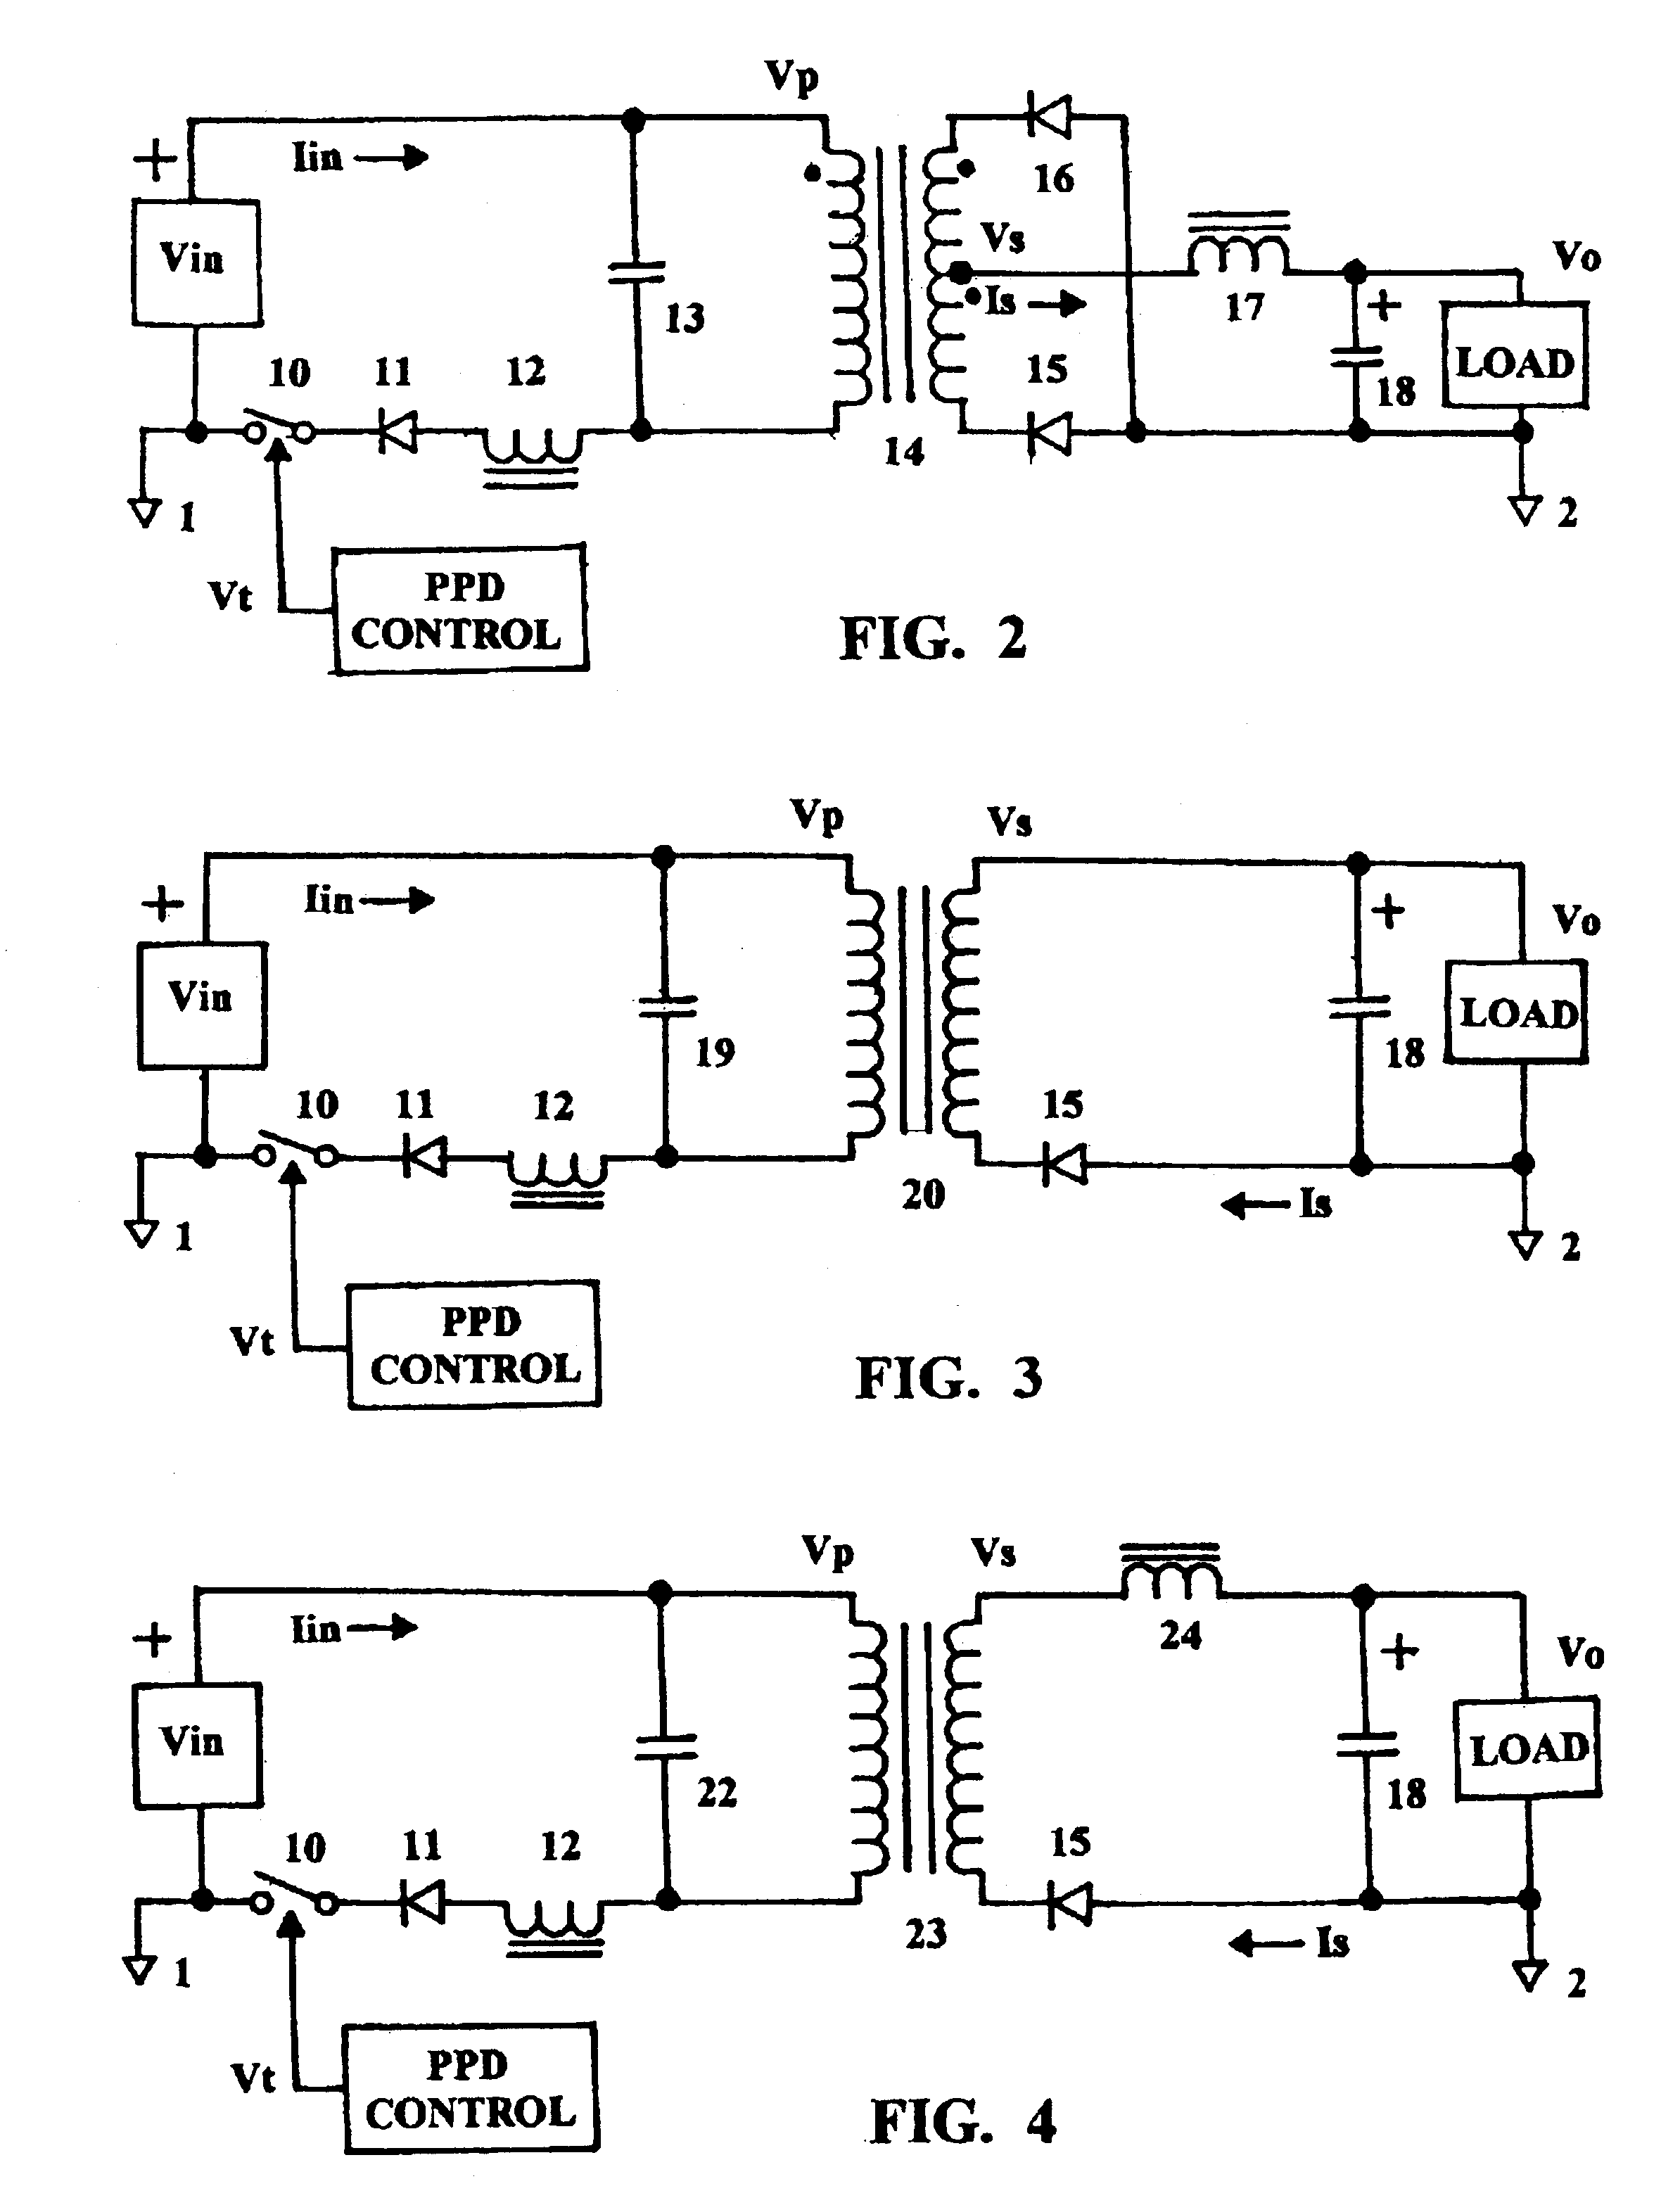 Power converter with input-side resonance and pulse-position demodulation feedback control